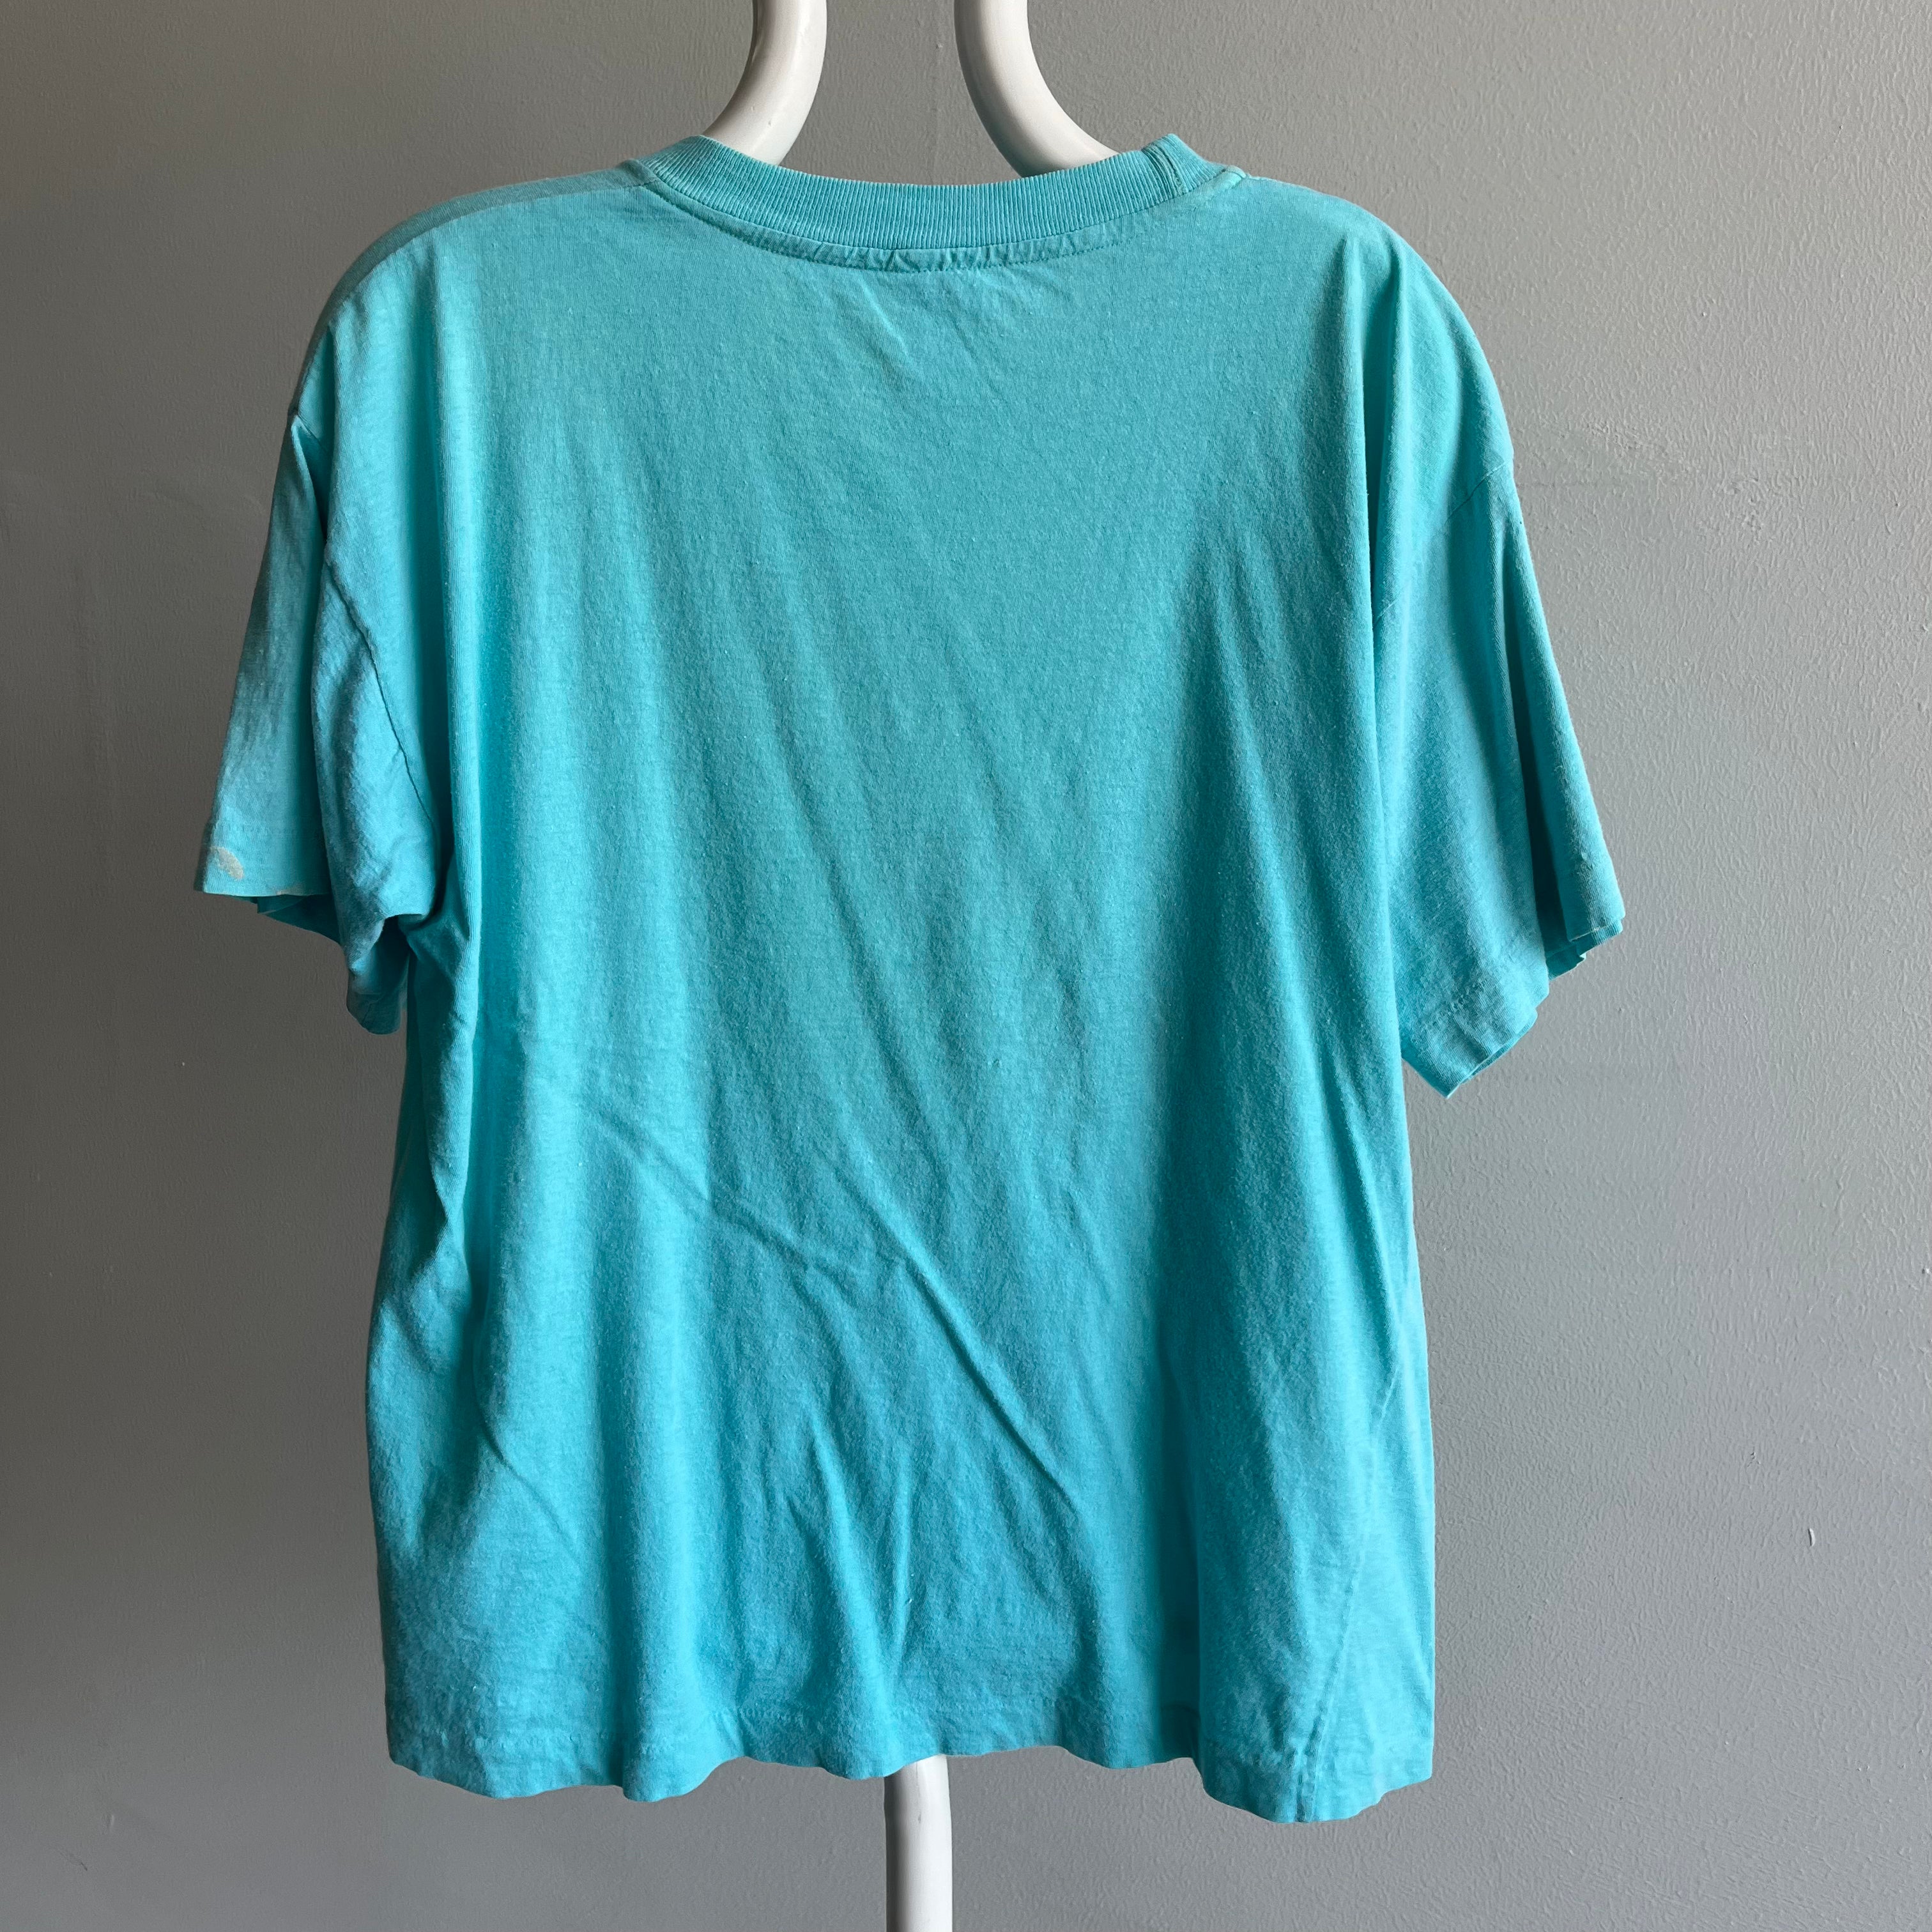 1987 St. Thomas Slouchy Tourist T-Shirt with Rad Staining